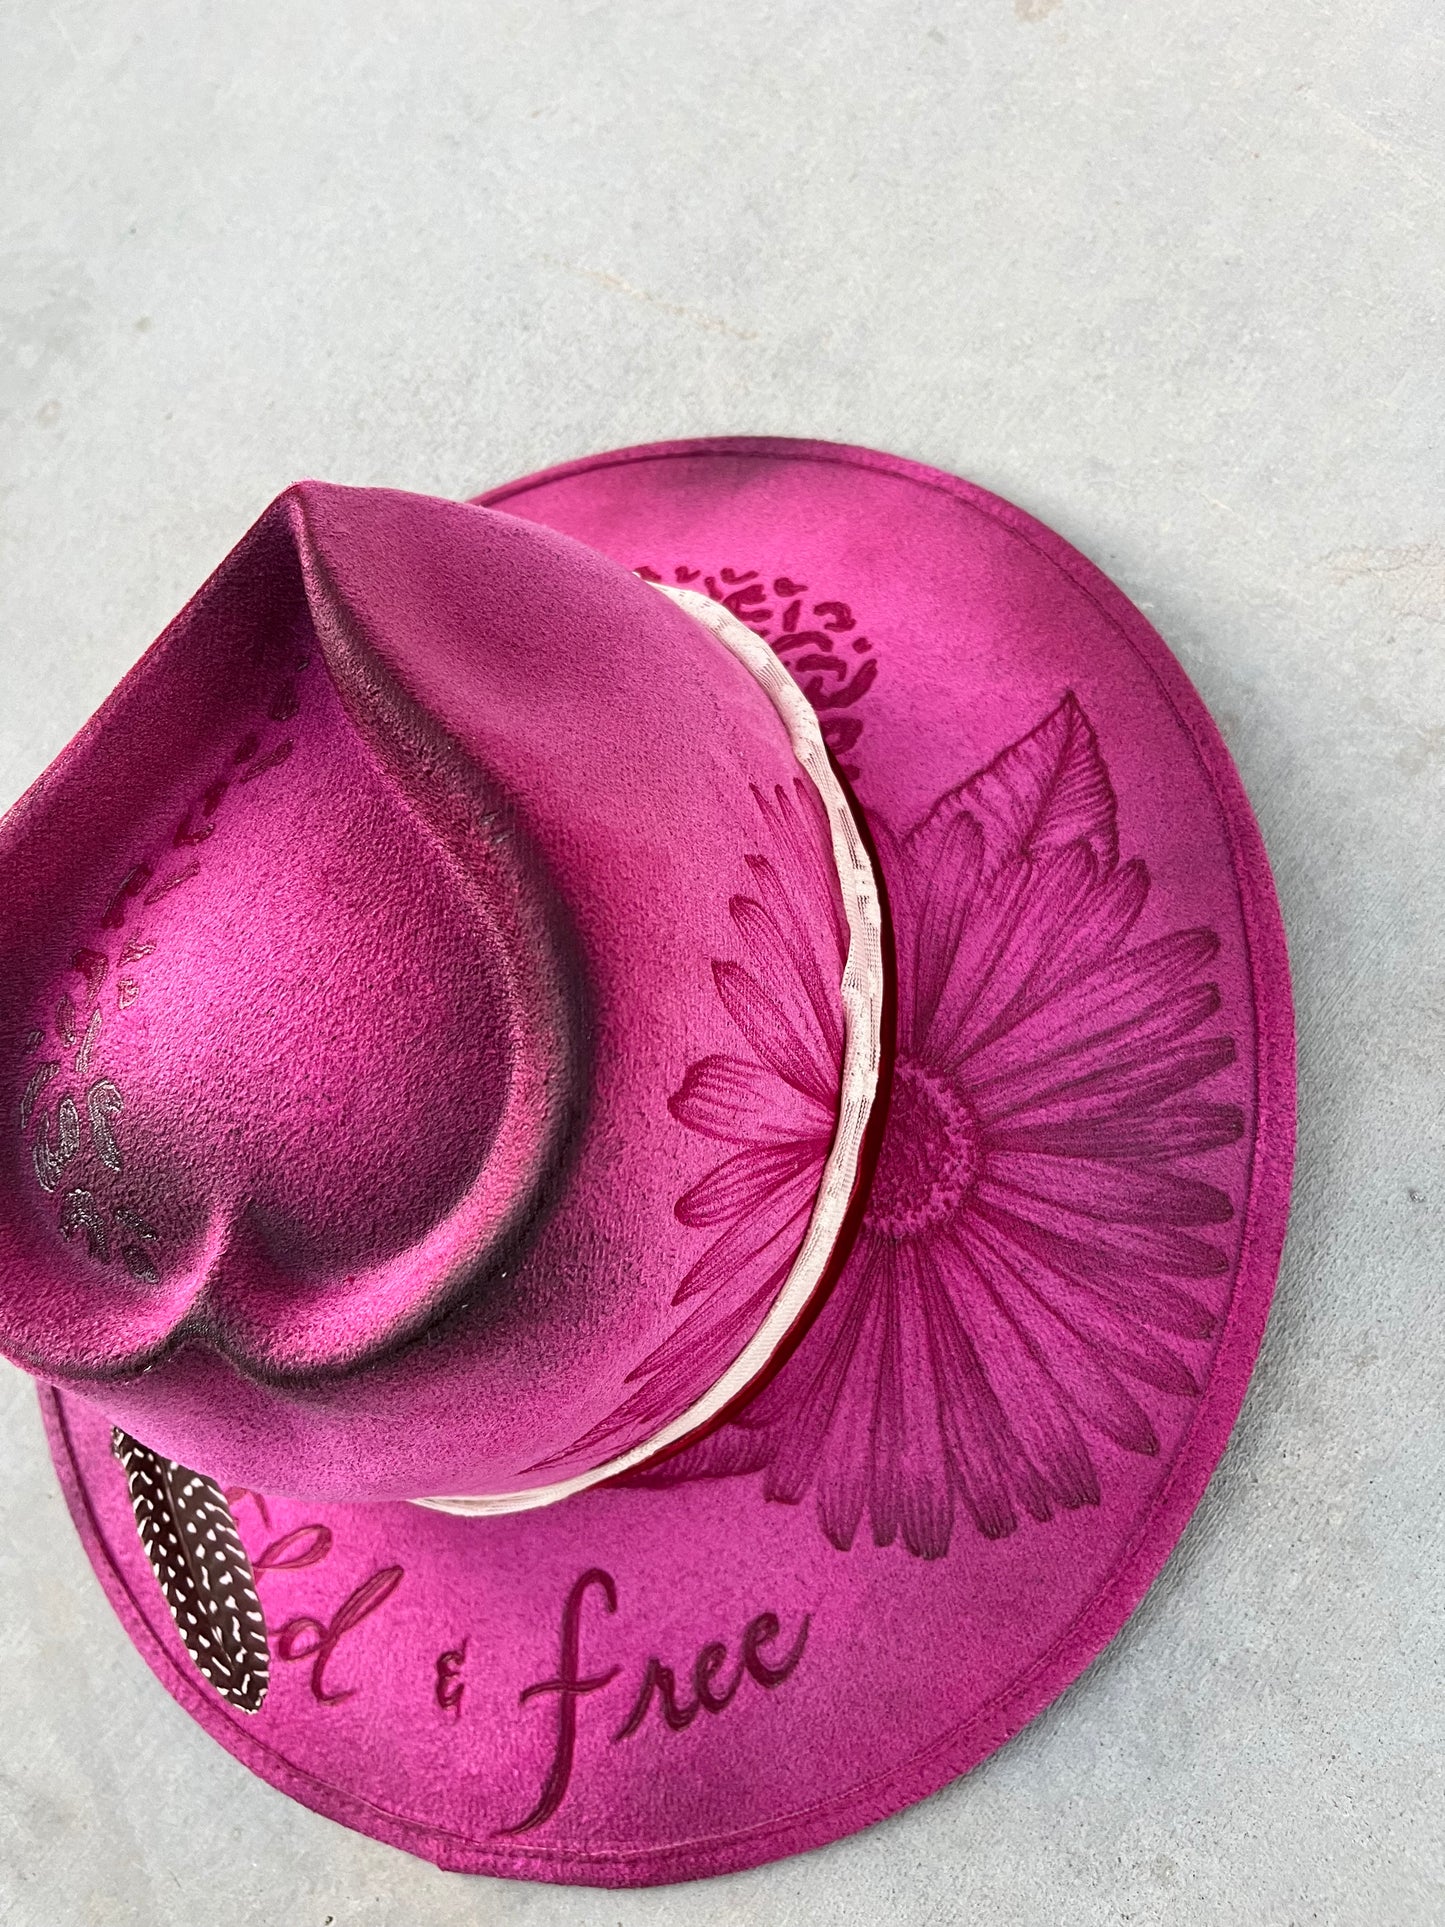 Pink wild free her pink floral heart crown burned accessorized suede wide brim rancher hat